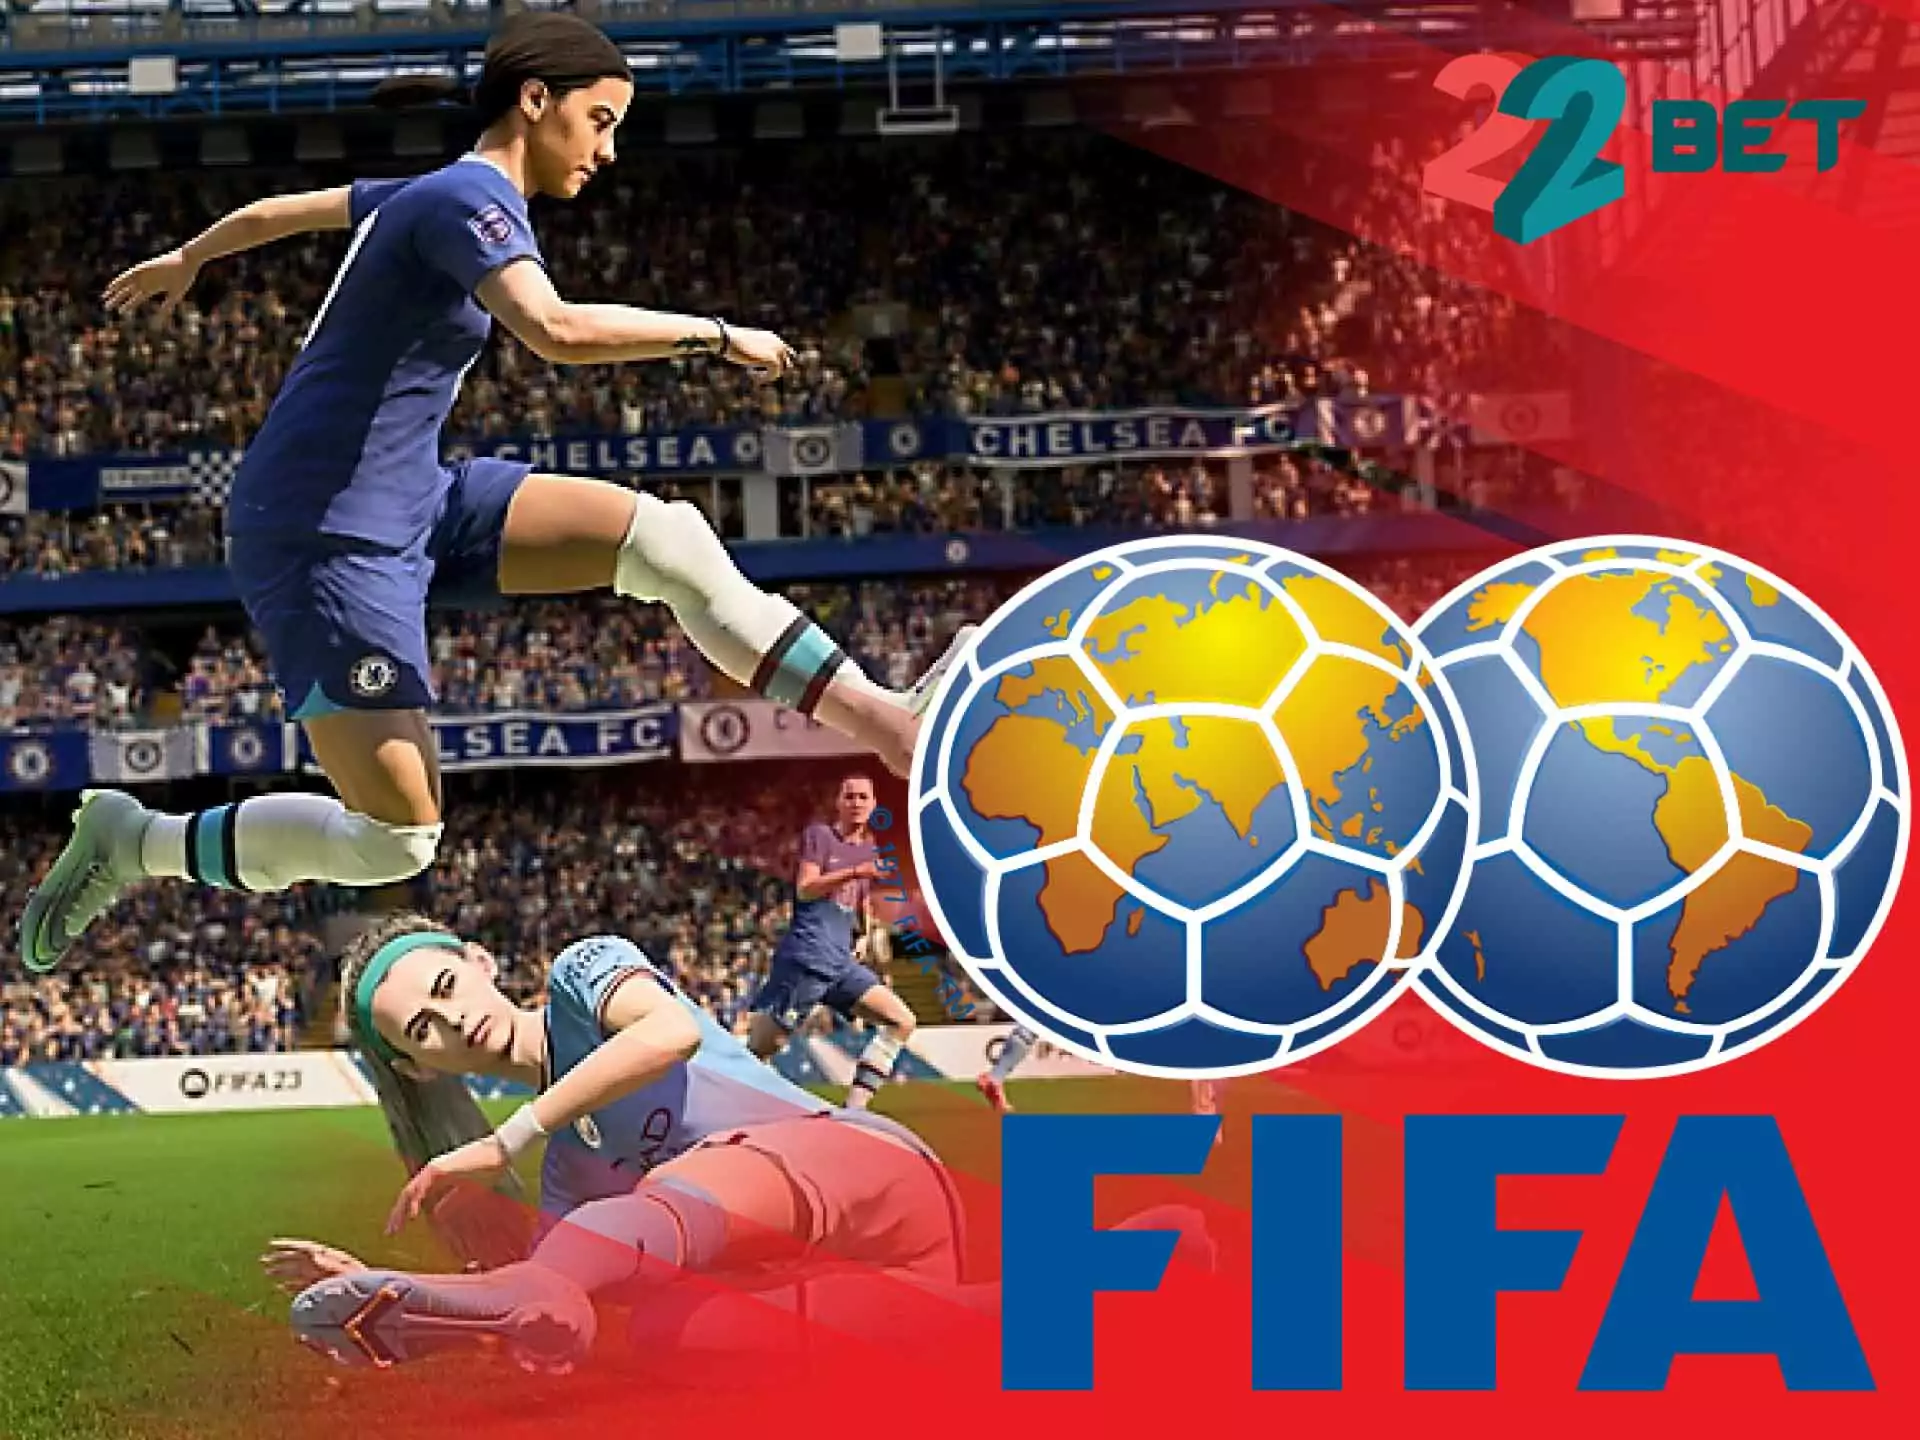 FIFA lovers can place bets and win from them at 22bet.